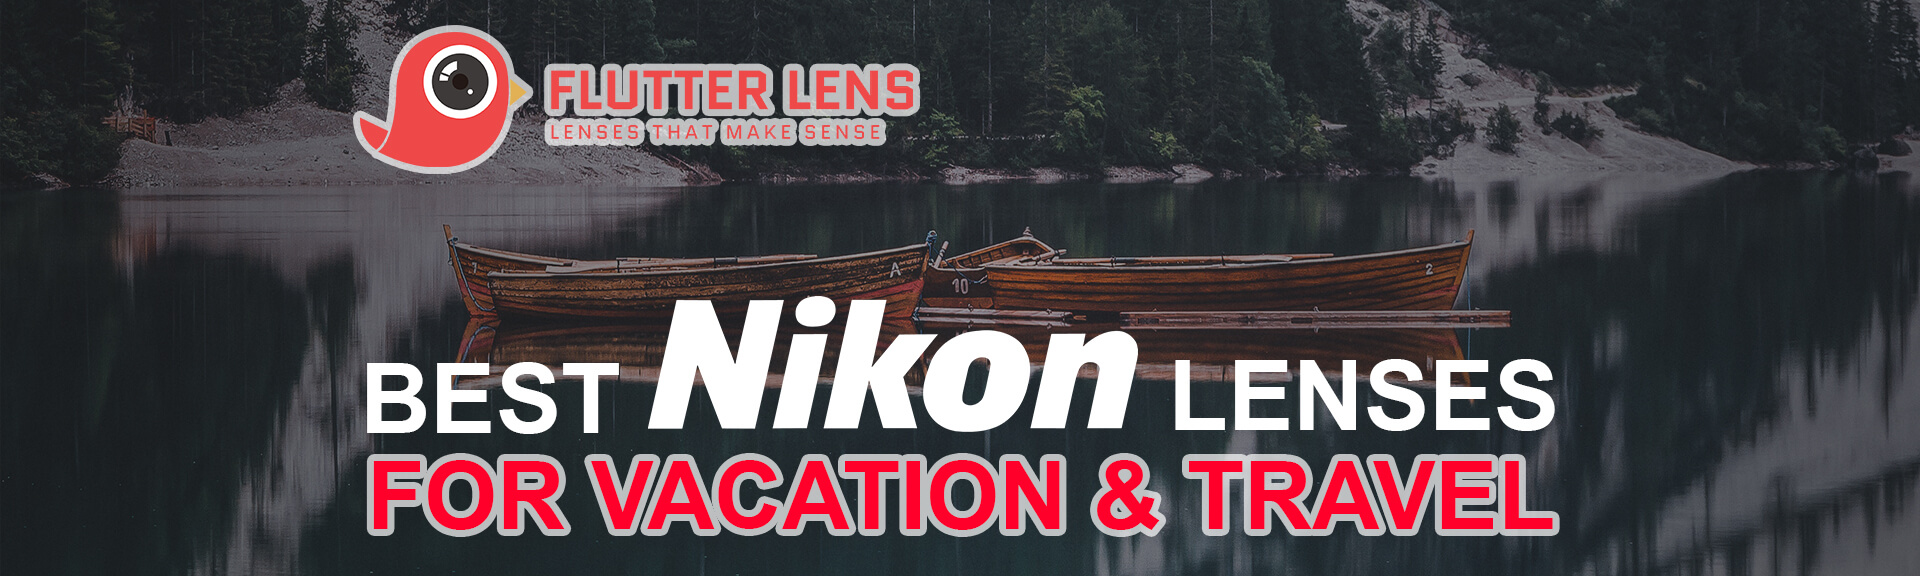 Best Nikon Lenses for Vacation